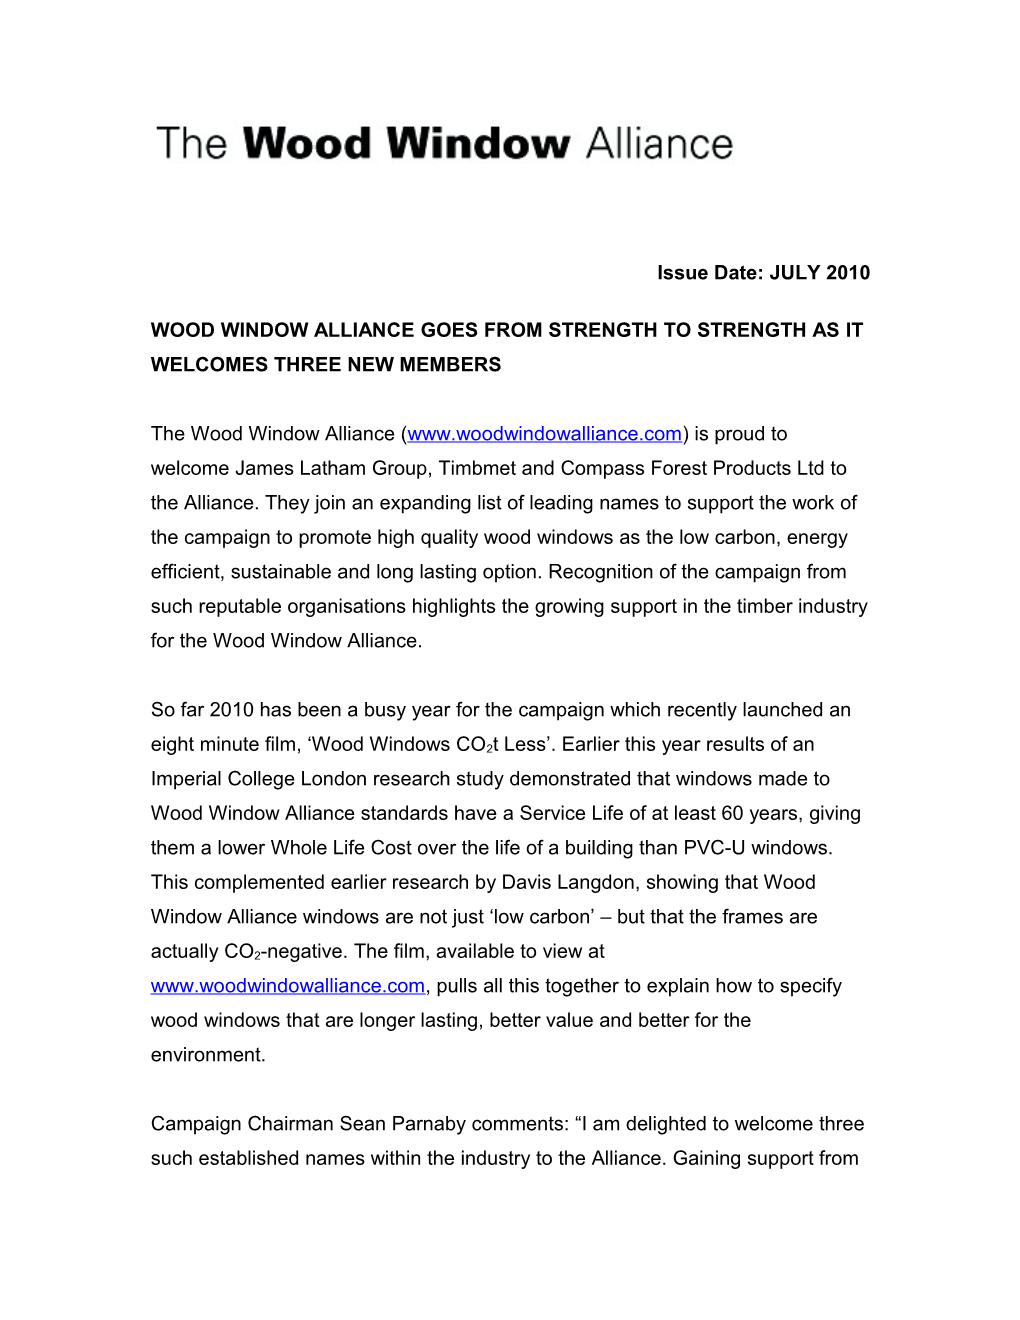 Wood Window Alliancegoes from Strength to Strength As It Welcomes Threenew Members